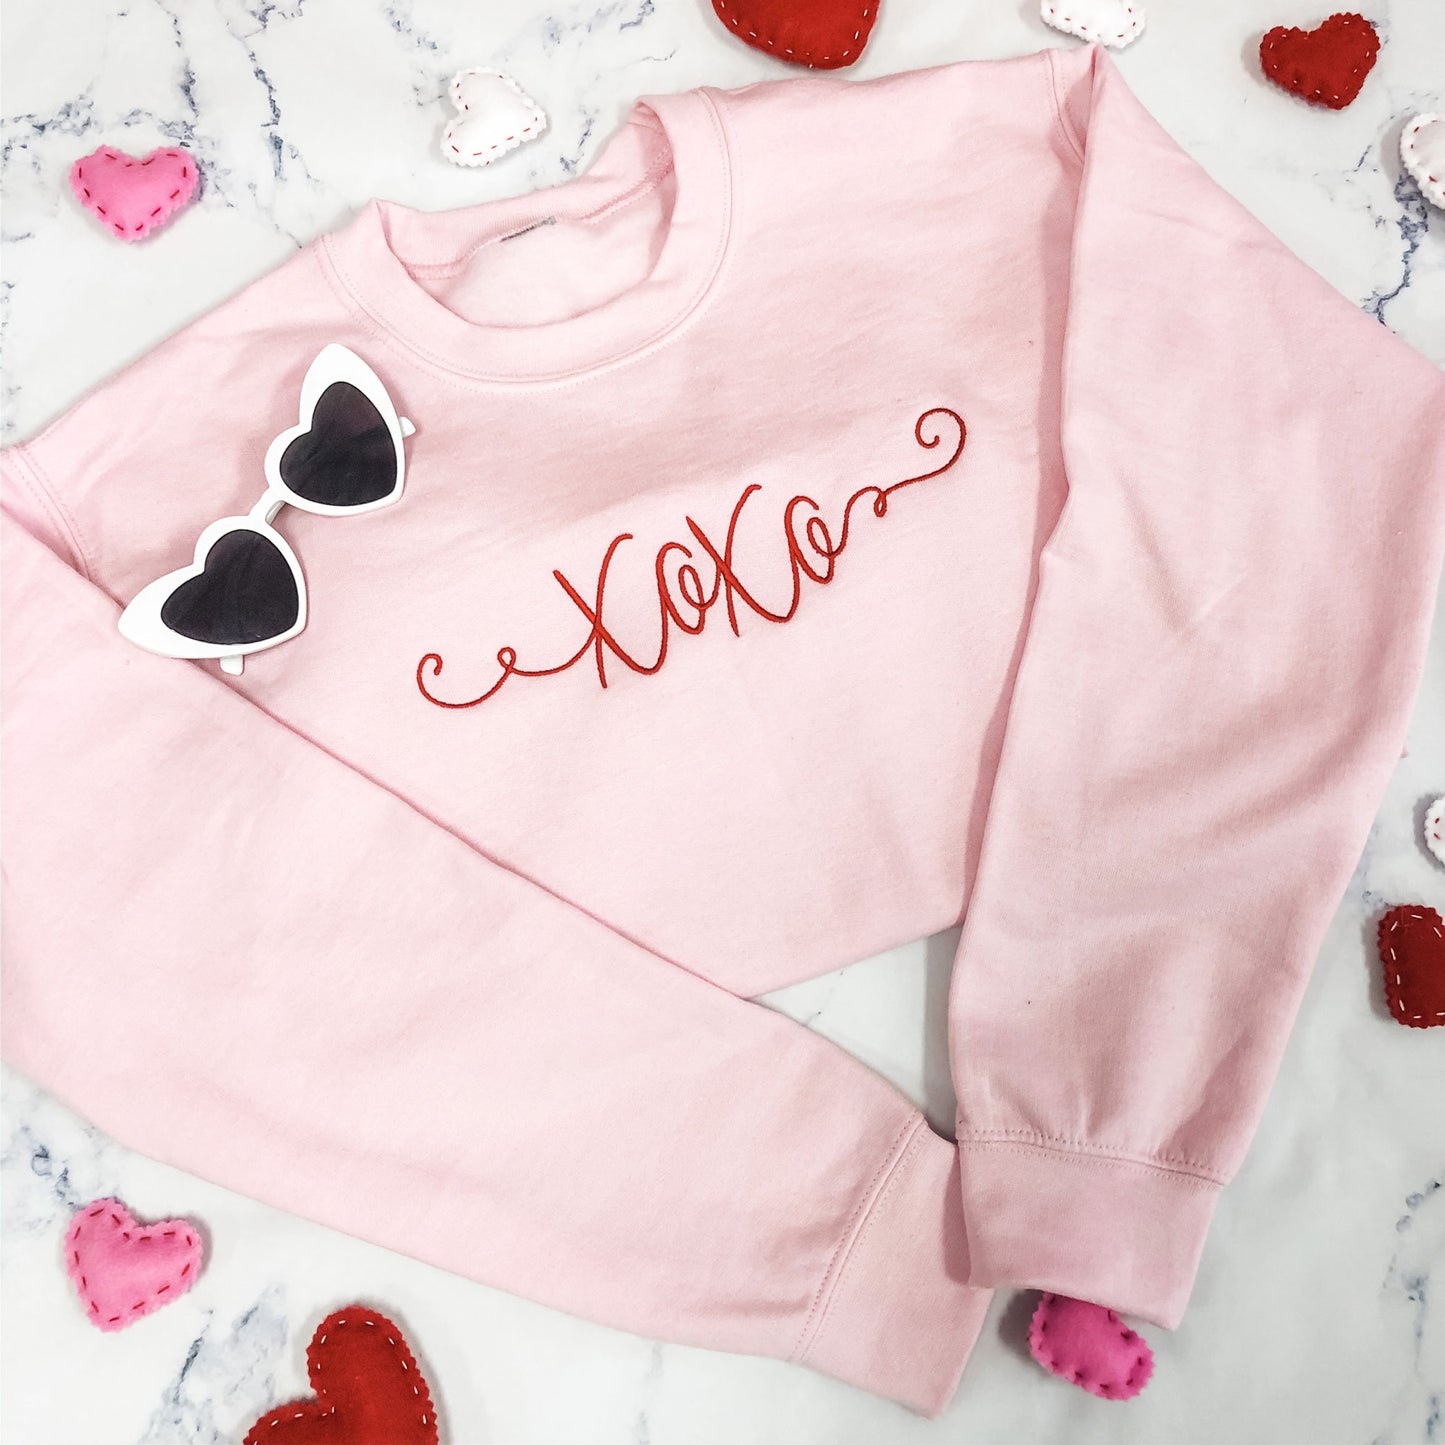 flatlay valentines day themed image with felt hearts, heart framed glasses, and a light pink crewneck sweatshirt with xoxo embroidered in a script font and crimson thread across the front